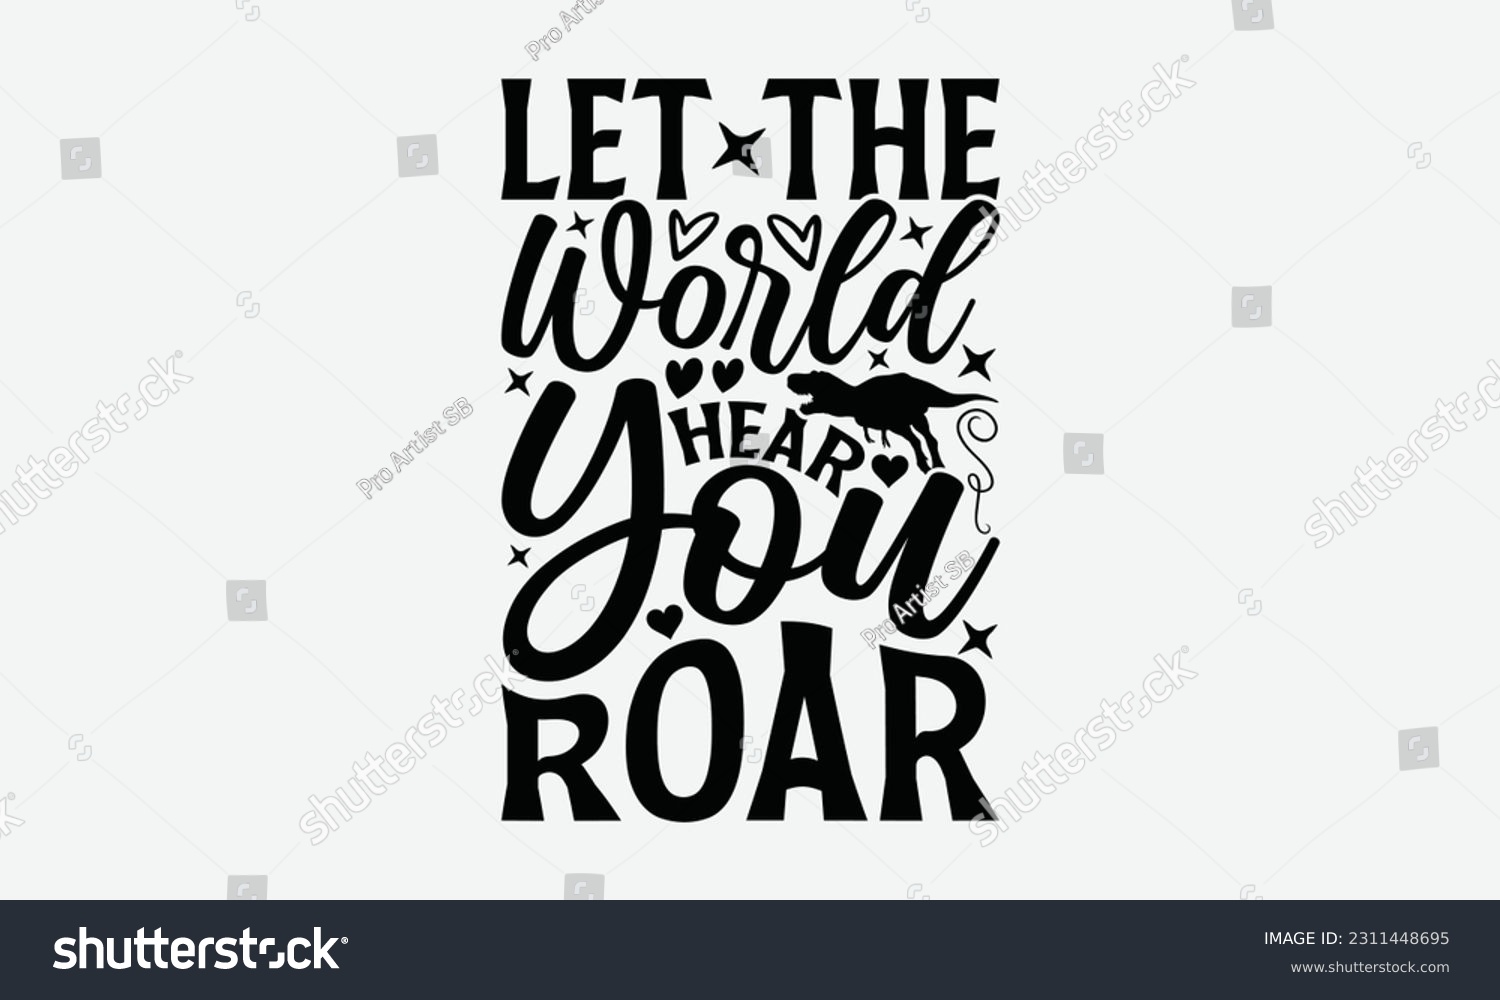 SVG of Let The World Hear You Roar - Dinosaur SVG Design, Handmade Calligraphy Vector Illustration, Greeting Card Template With Typography Text. svg